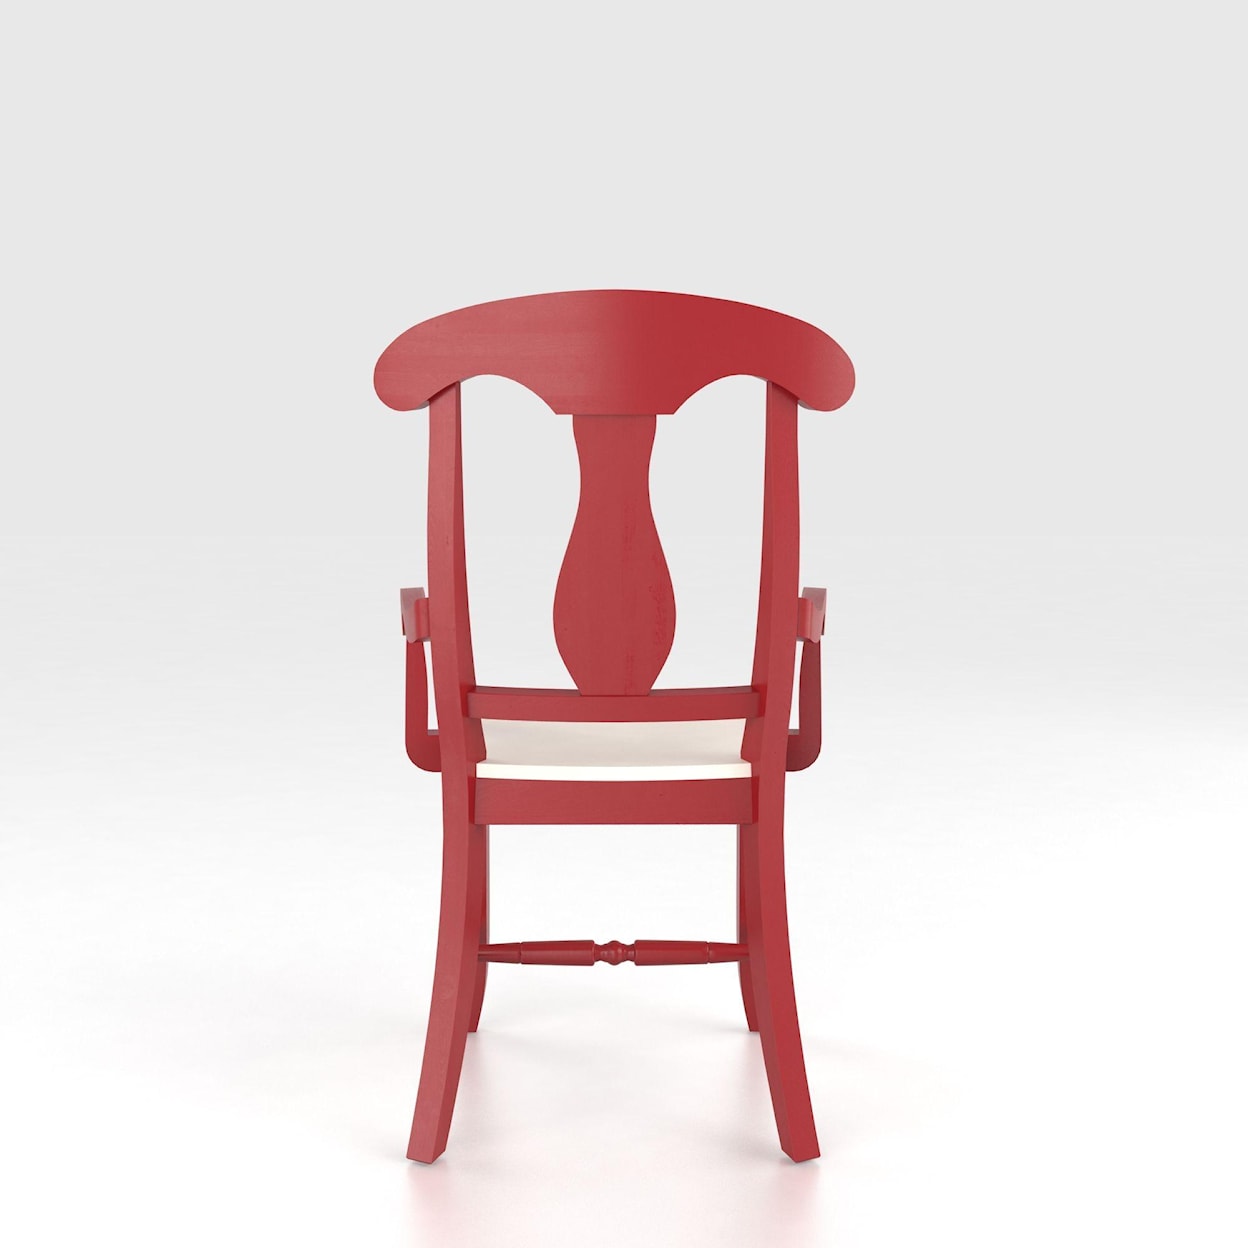 Canadel Canadel Customizable Arm Chair - Wood Seat